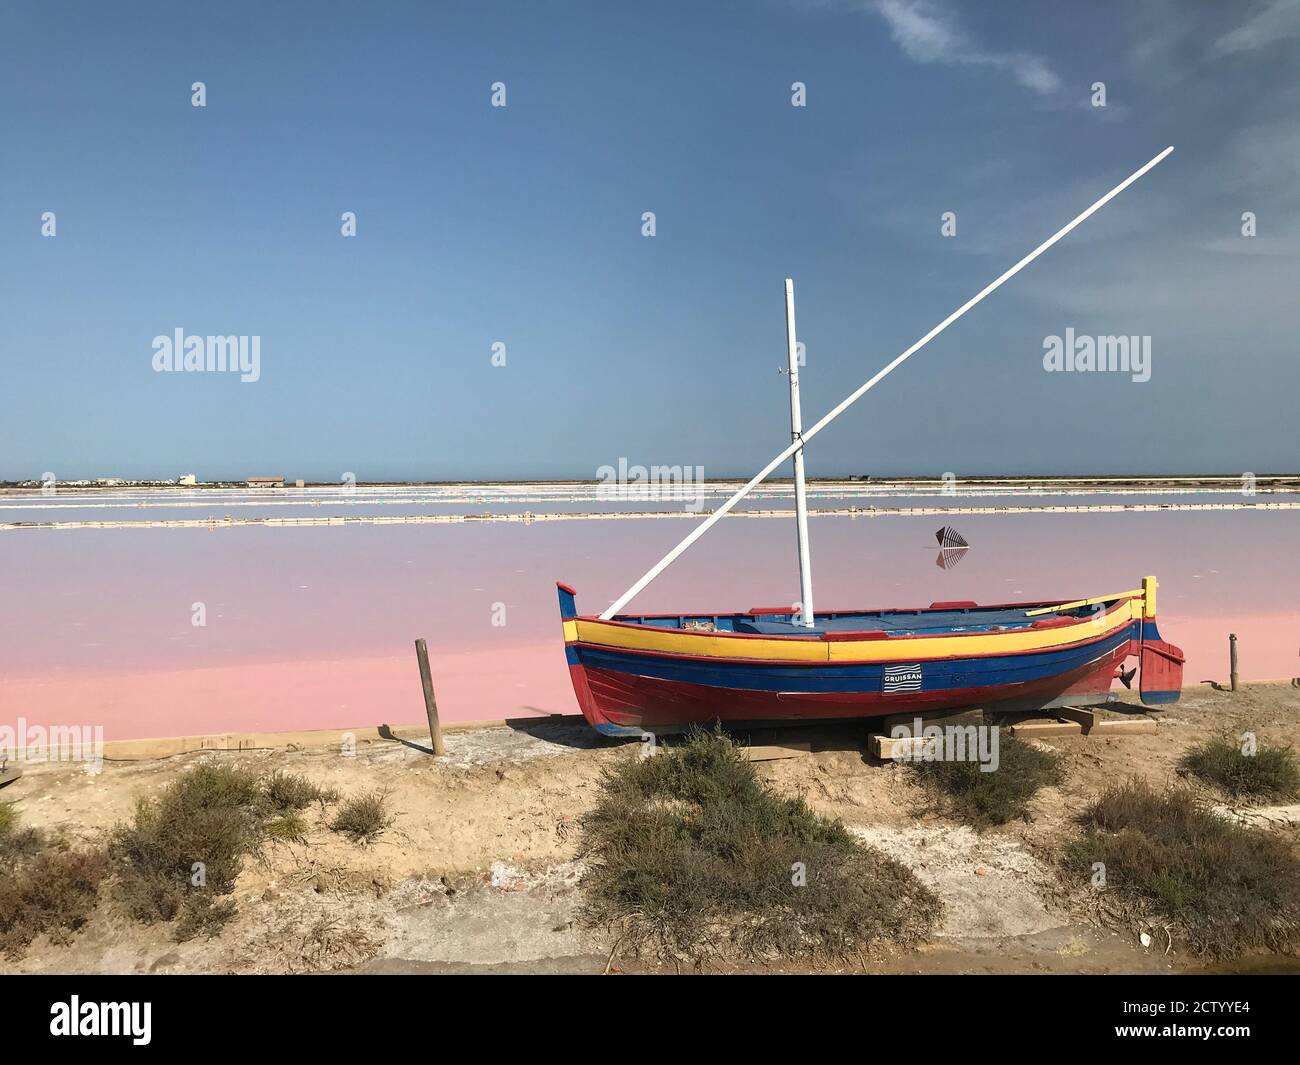 The colorful boat in front of the also colorful salt marsh of the salines in Gruissan, south france Stock Photo